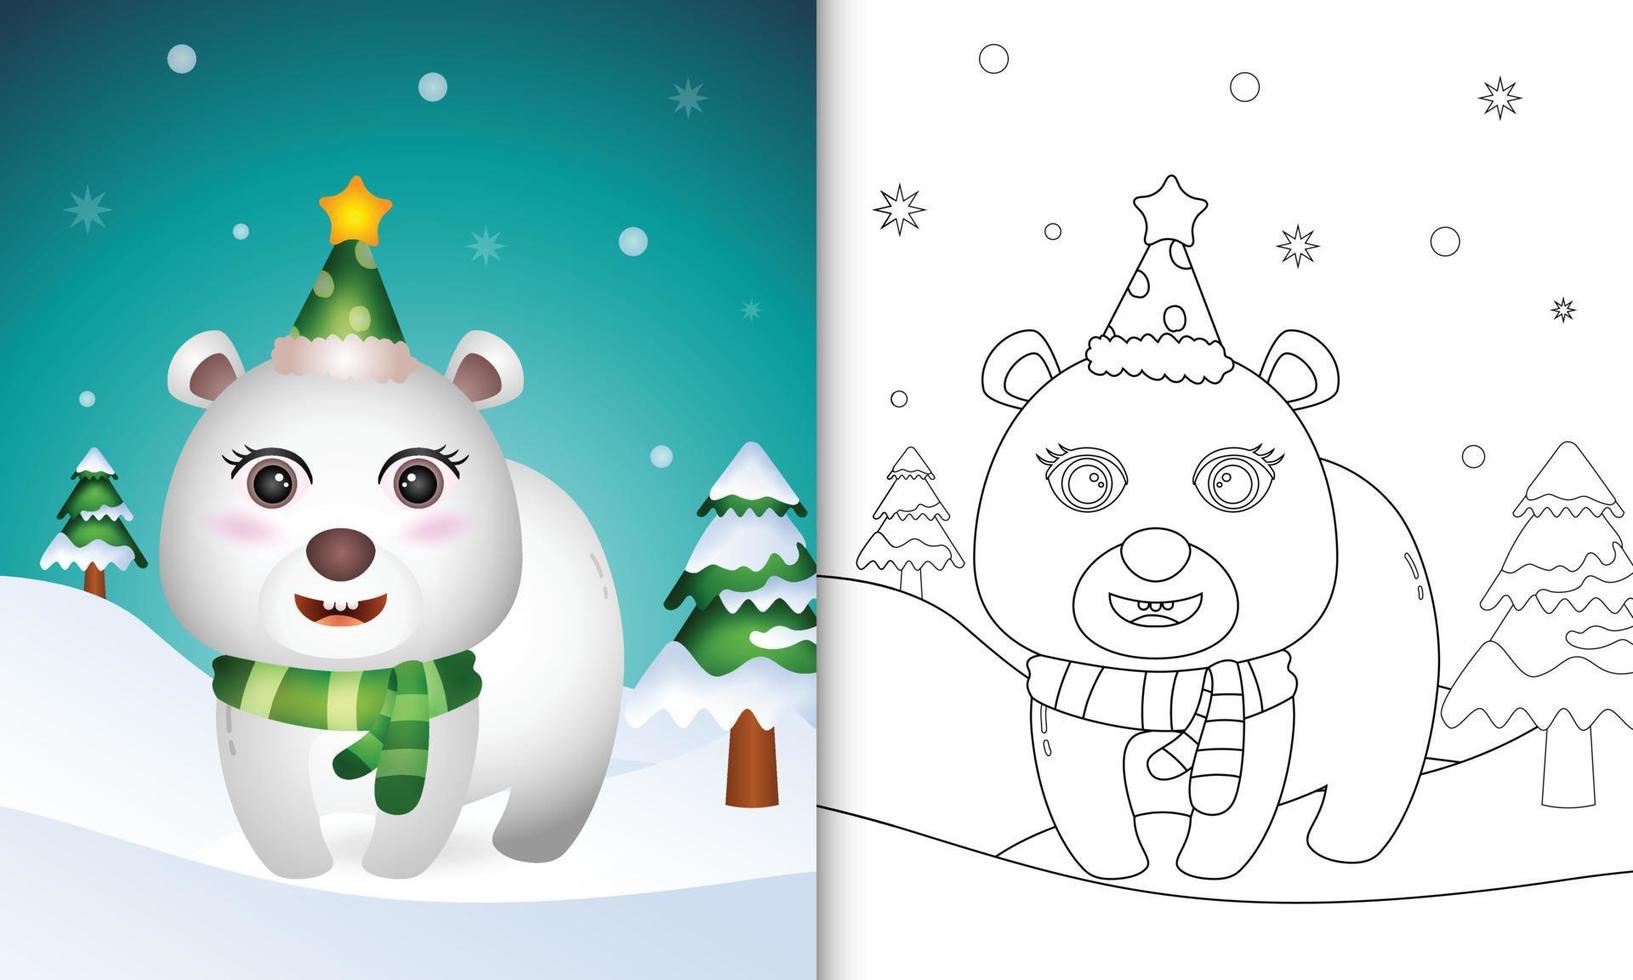 coloring book with a cute polar bear christmas characters collection with a hat and scarf vector